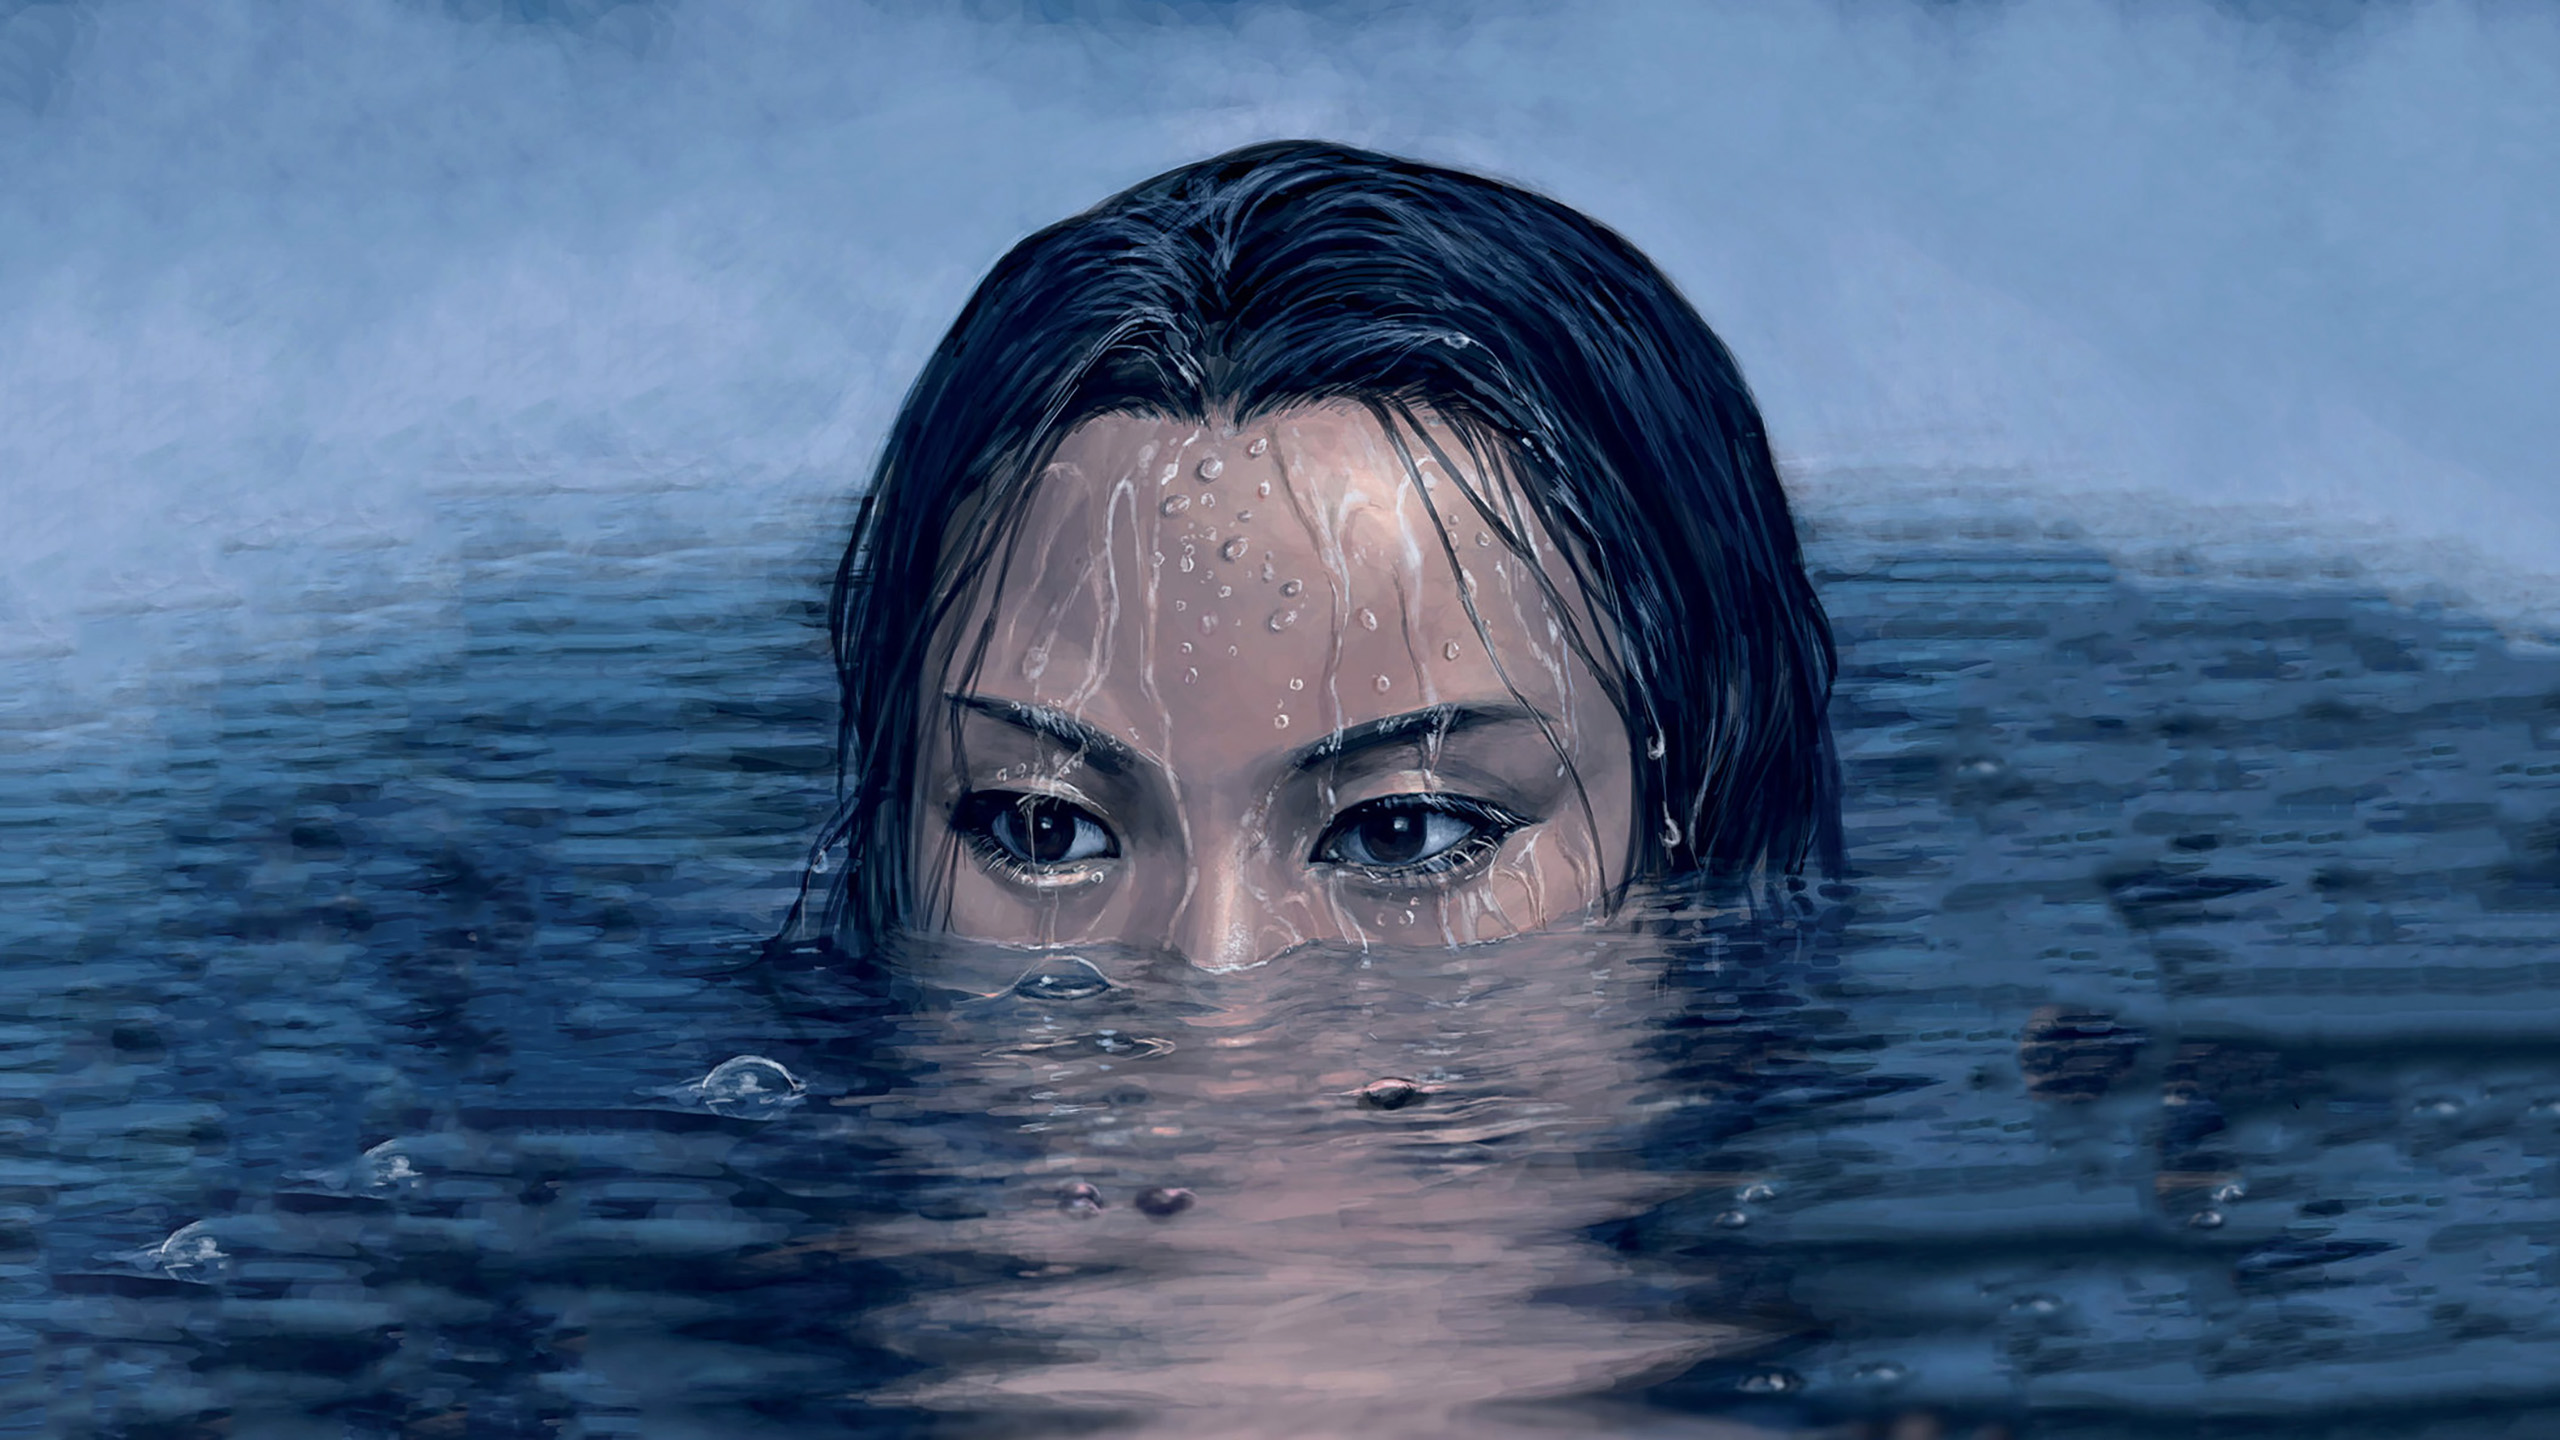 Painting Wormrot Asian Water Eyes Album Covers In Water 2560x1440